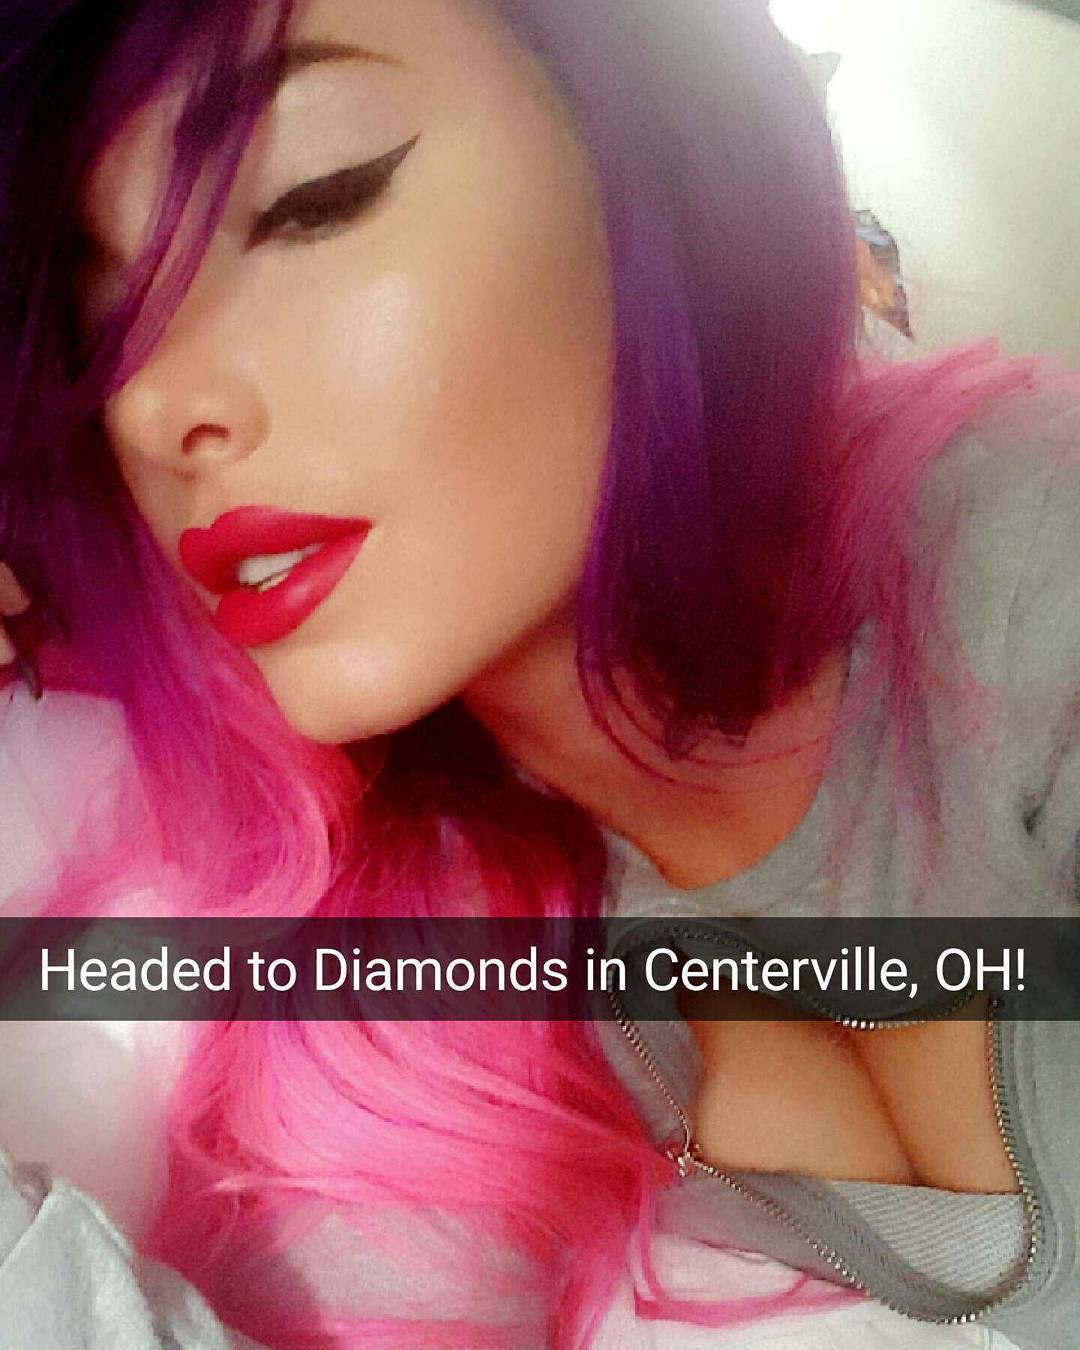 Headed to @diamondscabaretohio for my last 2 shows of the weekend! Snap is ChristyMack